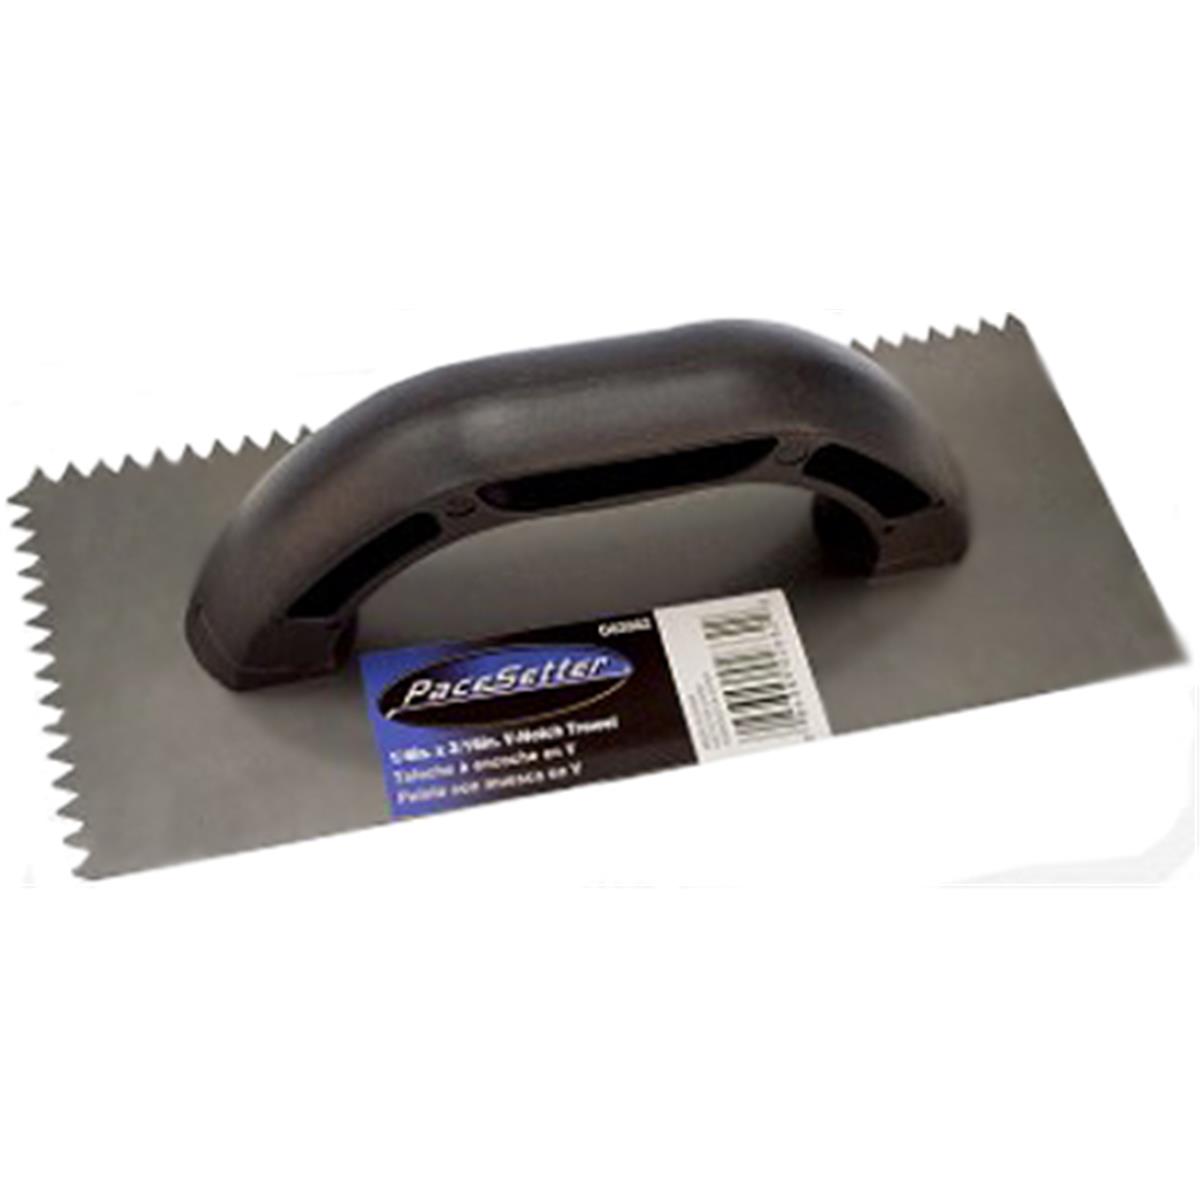 G02663 0.18 X 0.15 In. V Plastic Handle